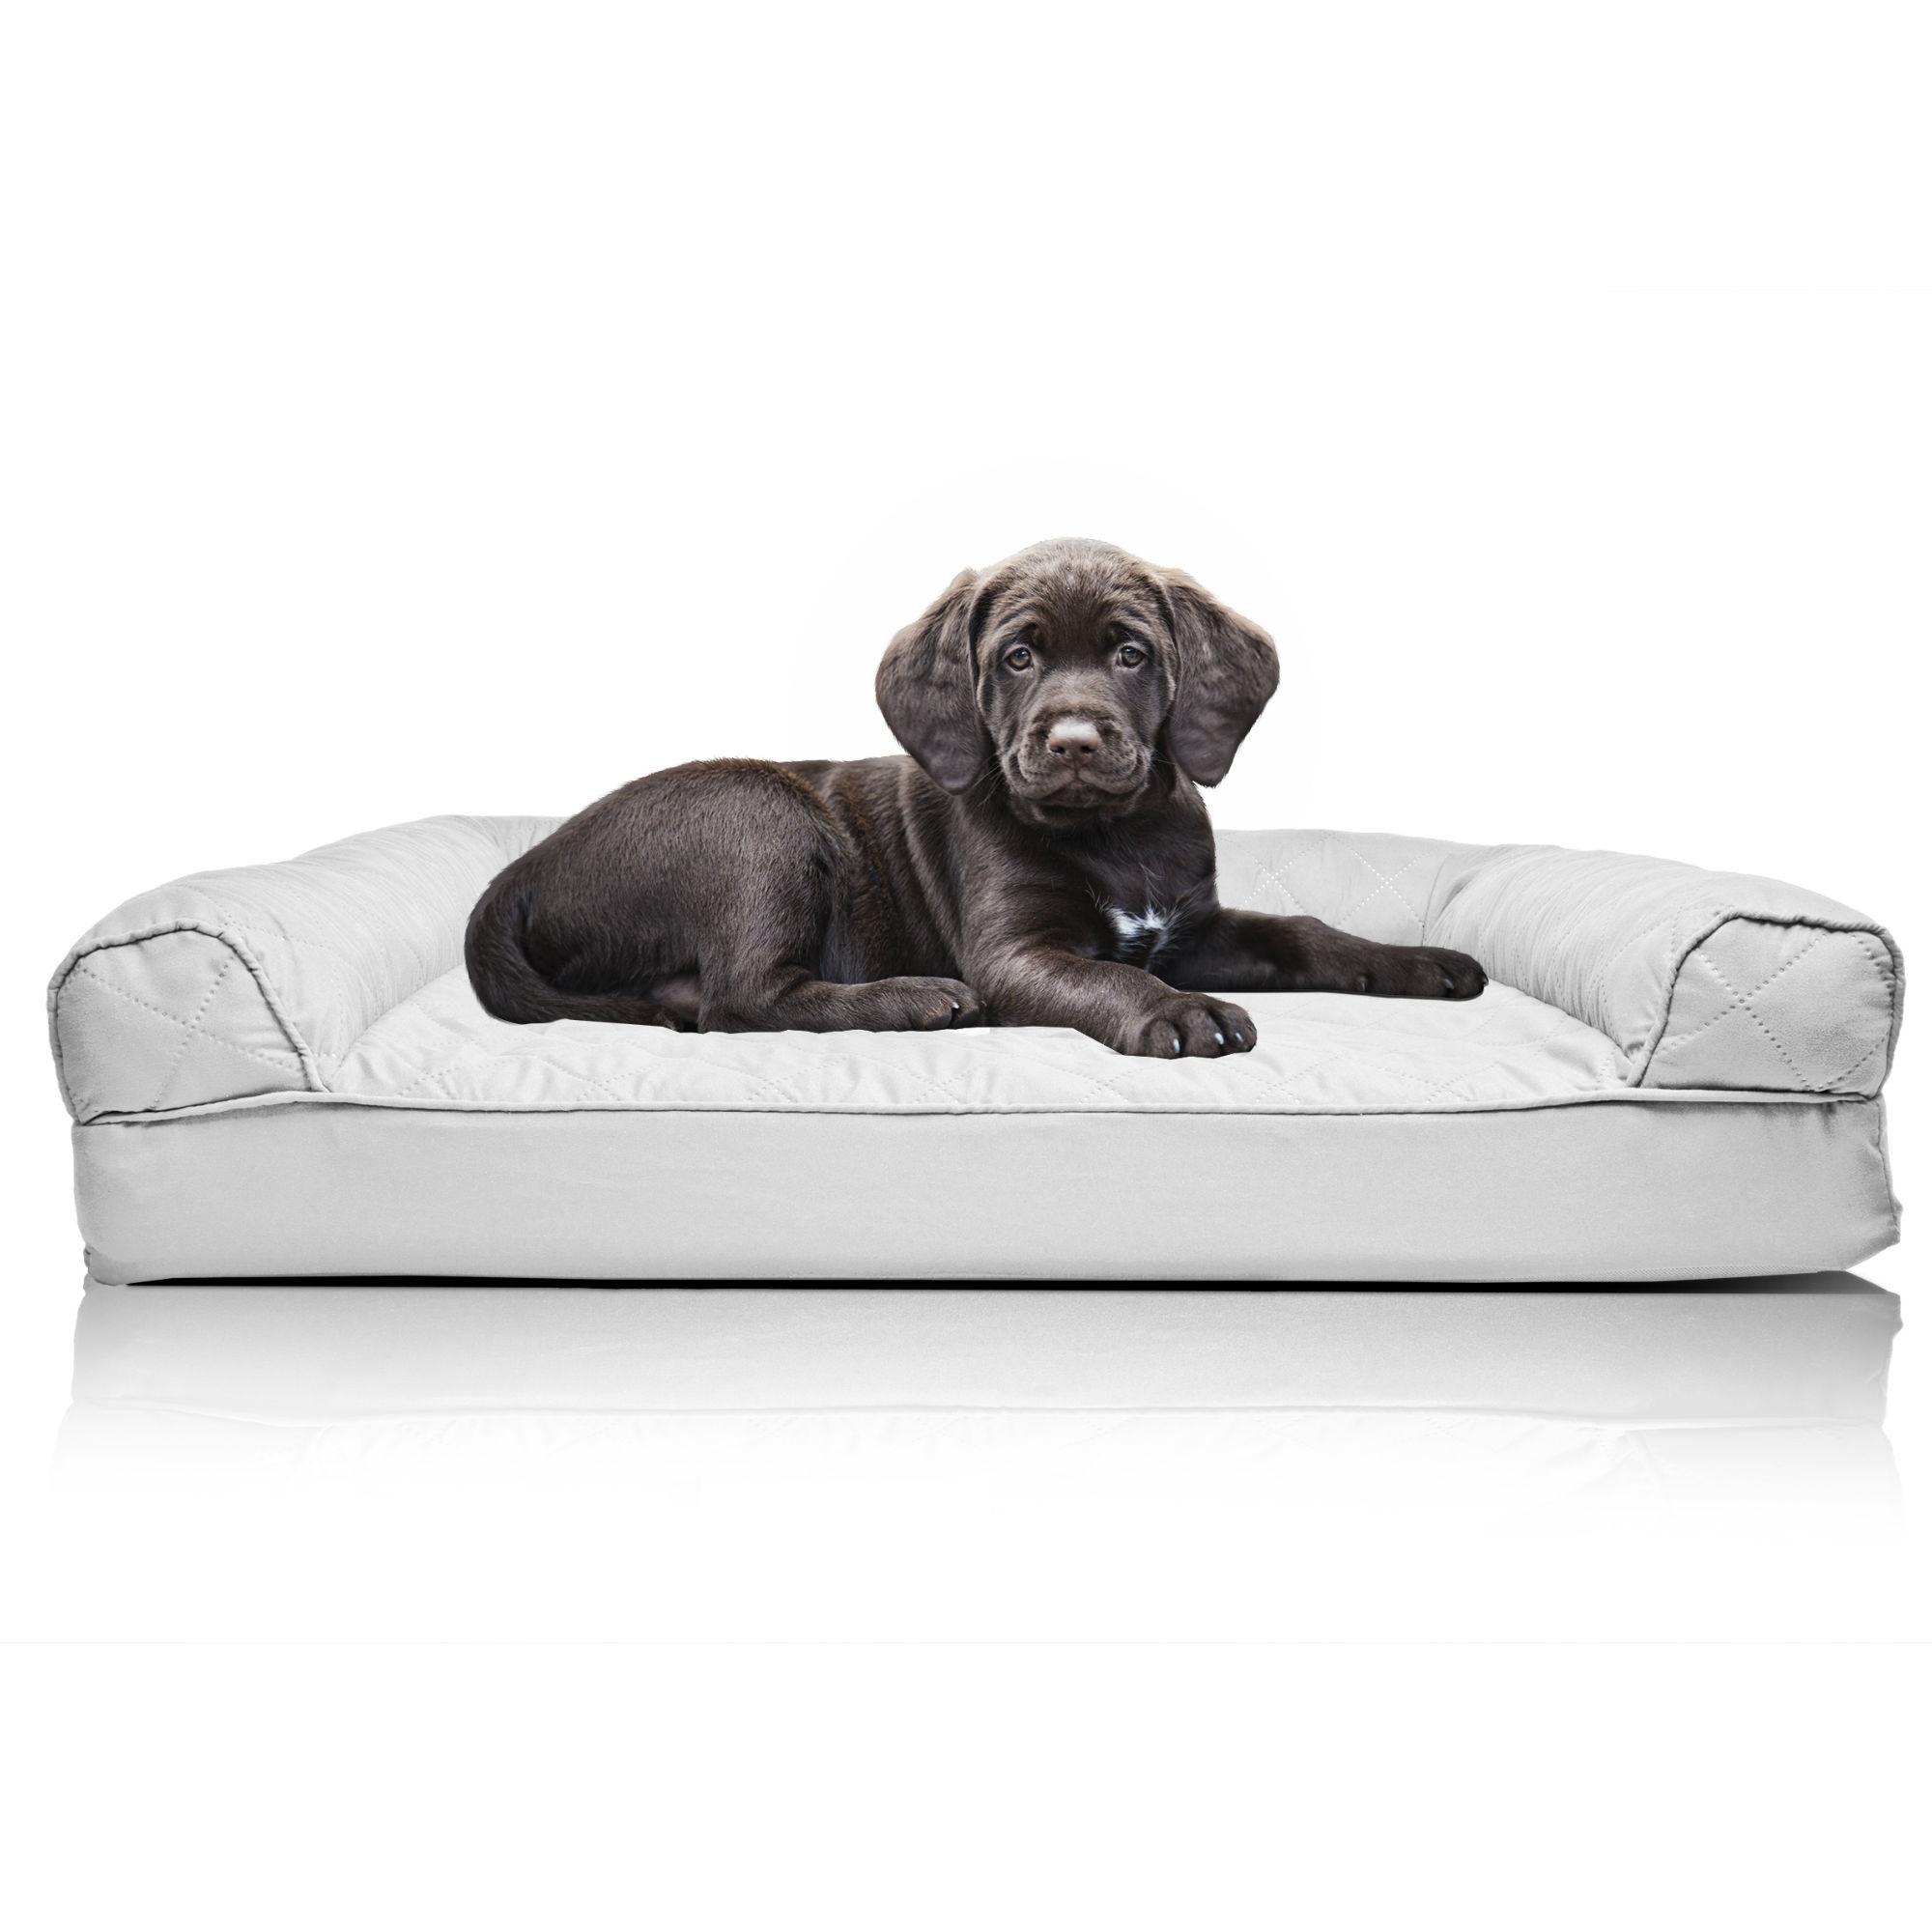 Furhaven Quilted Orthopedic Sofa Pet Bed - Silver Gray